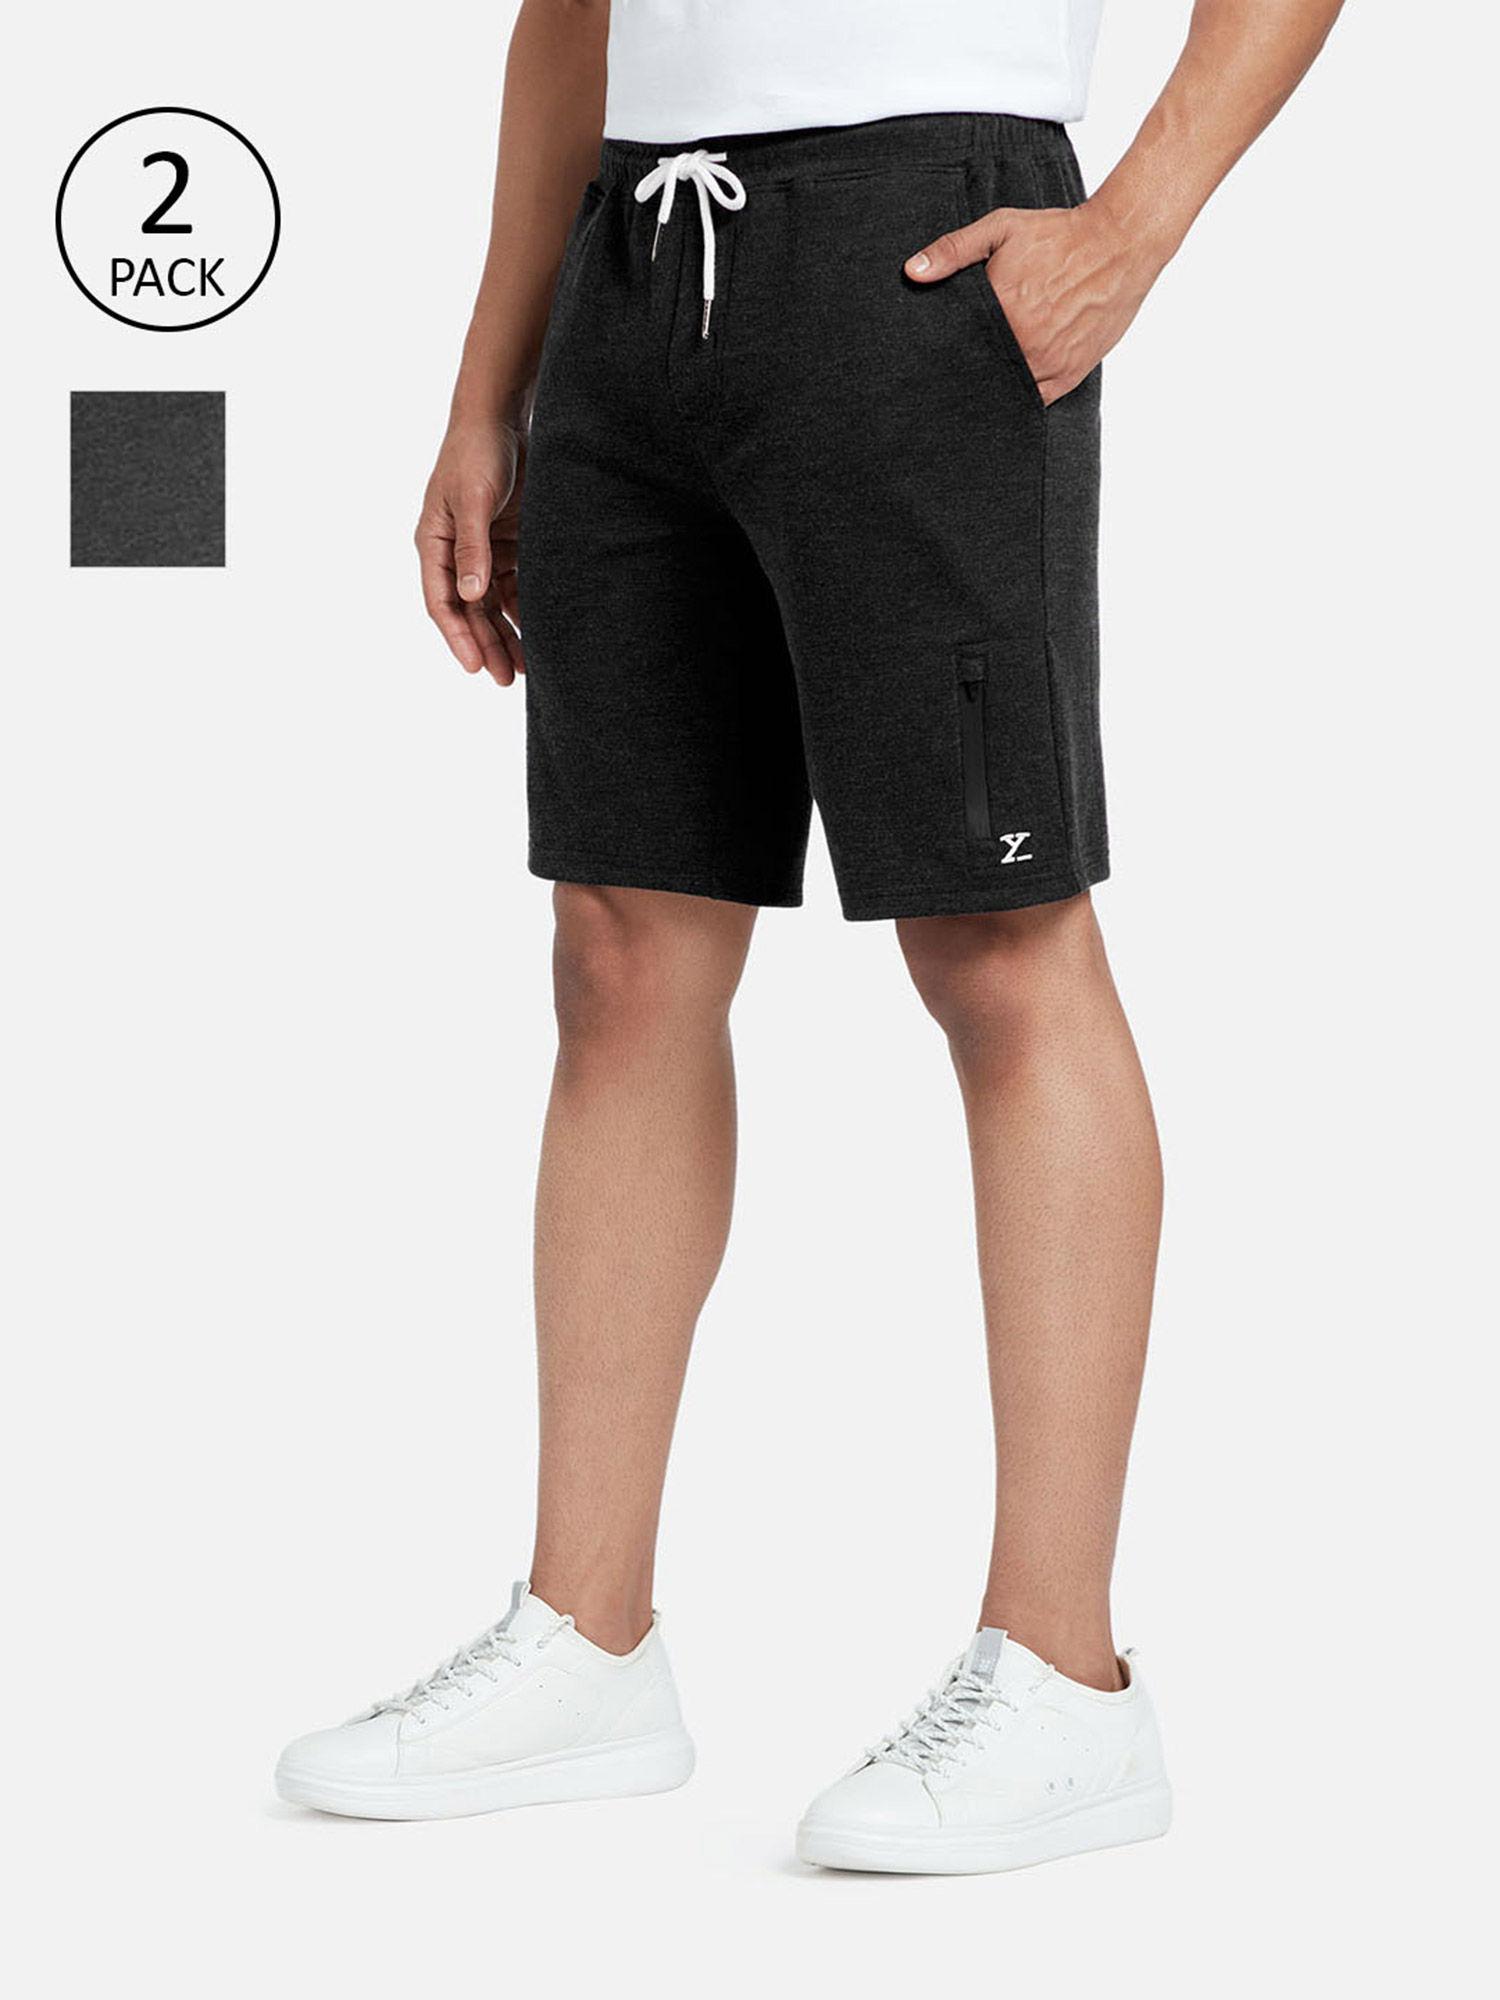 men cotton rich shorts with zipper pocket (pack of 2)